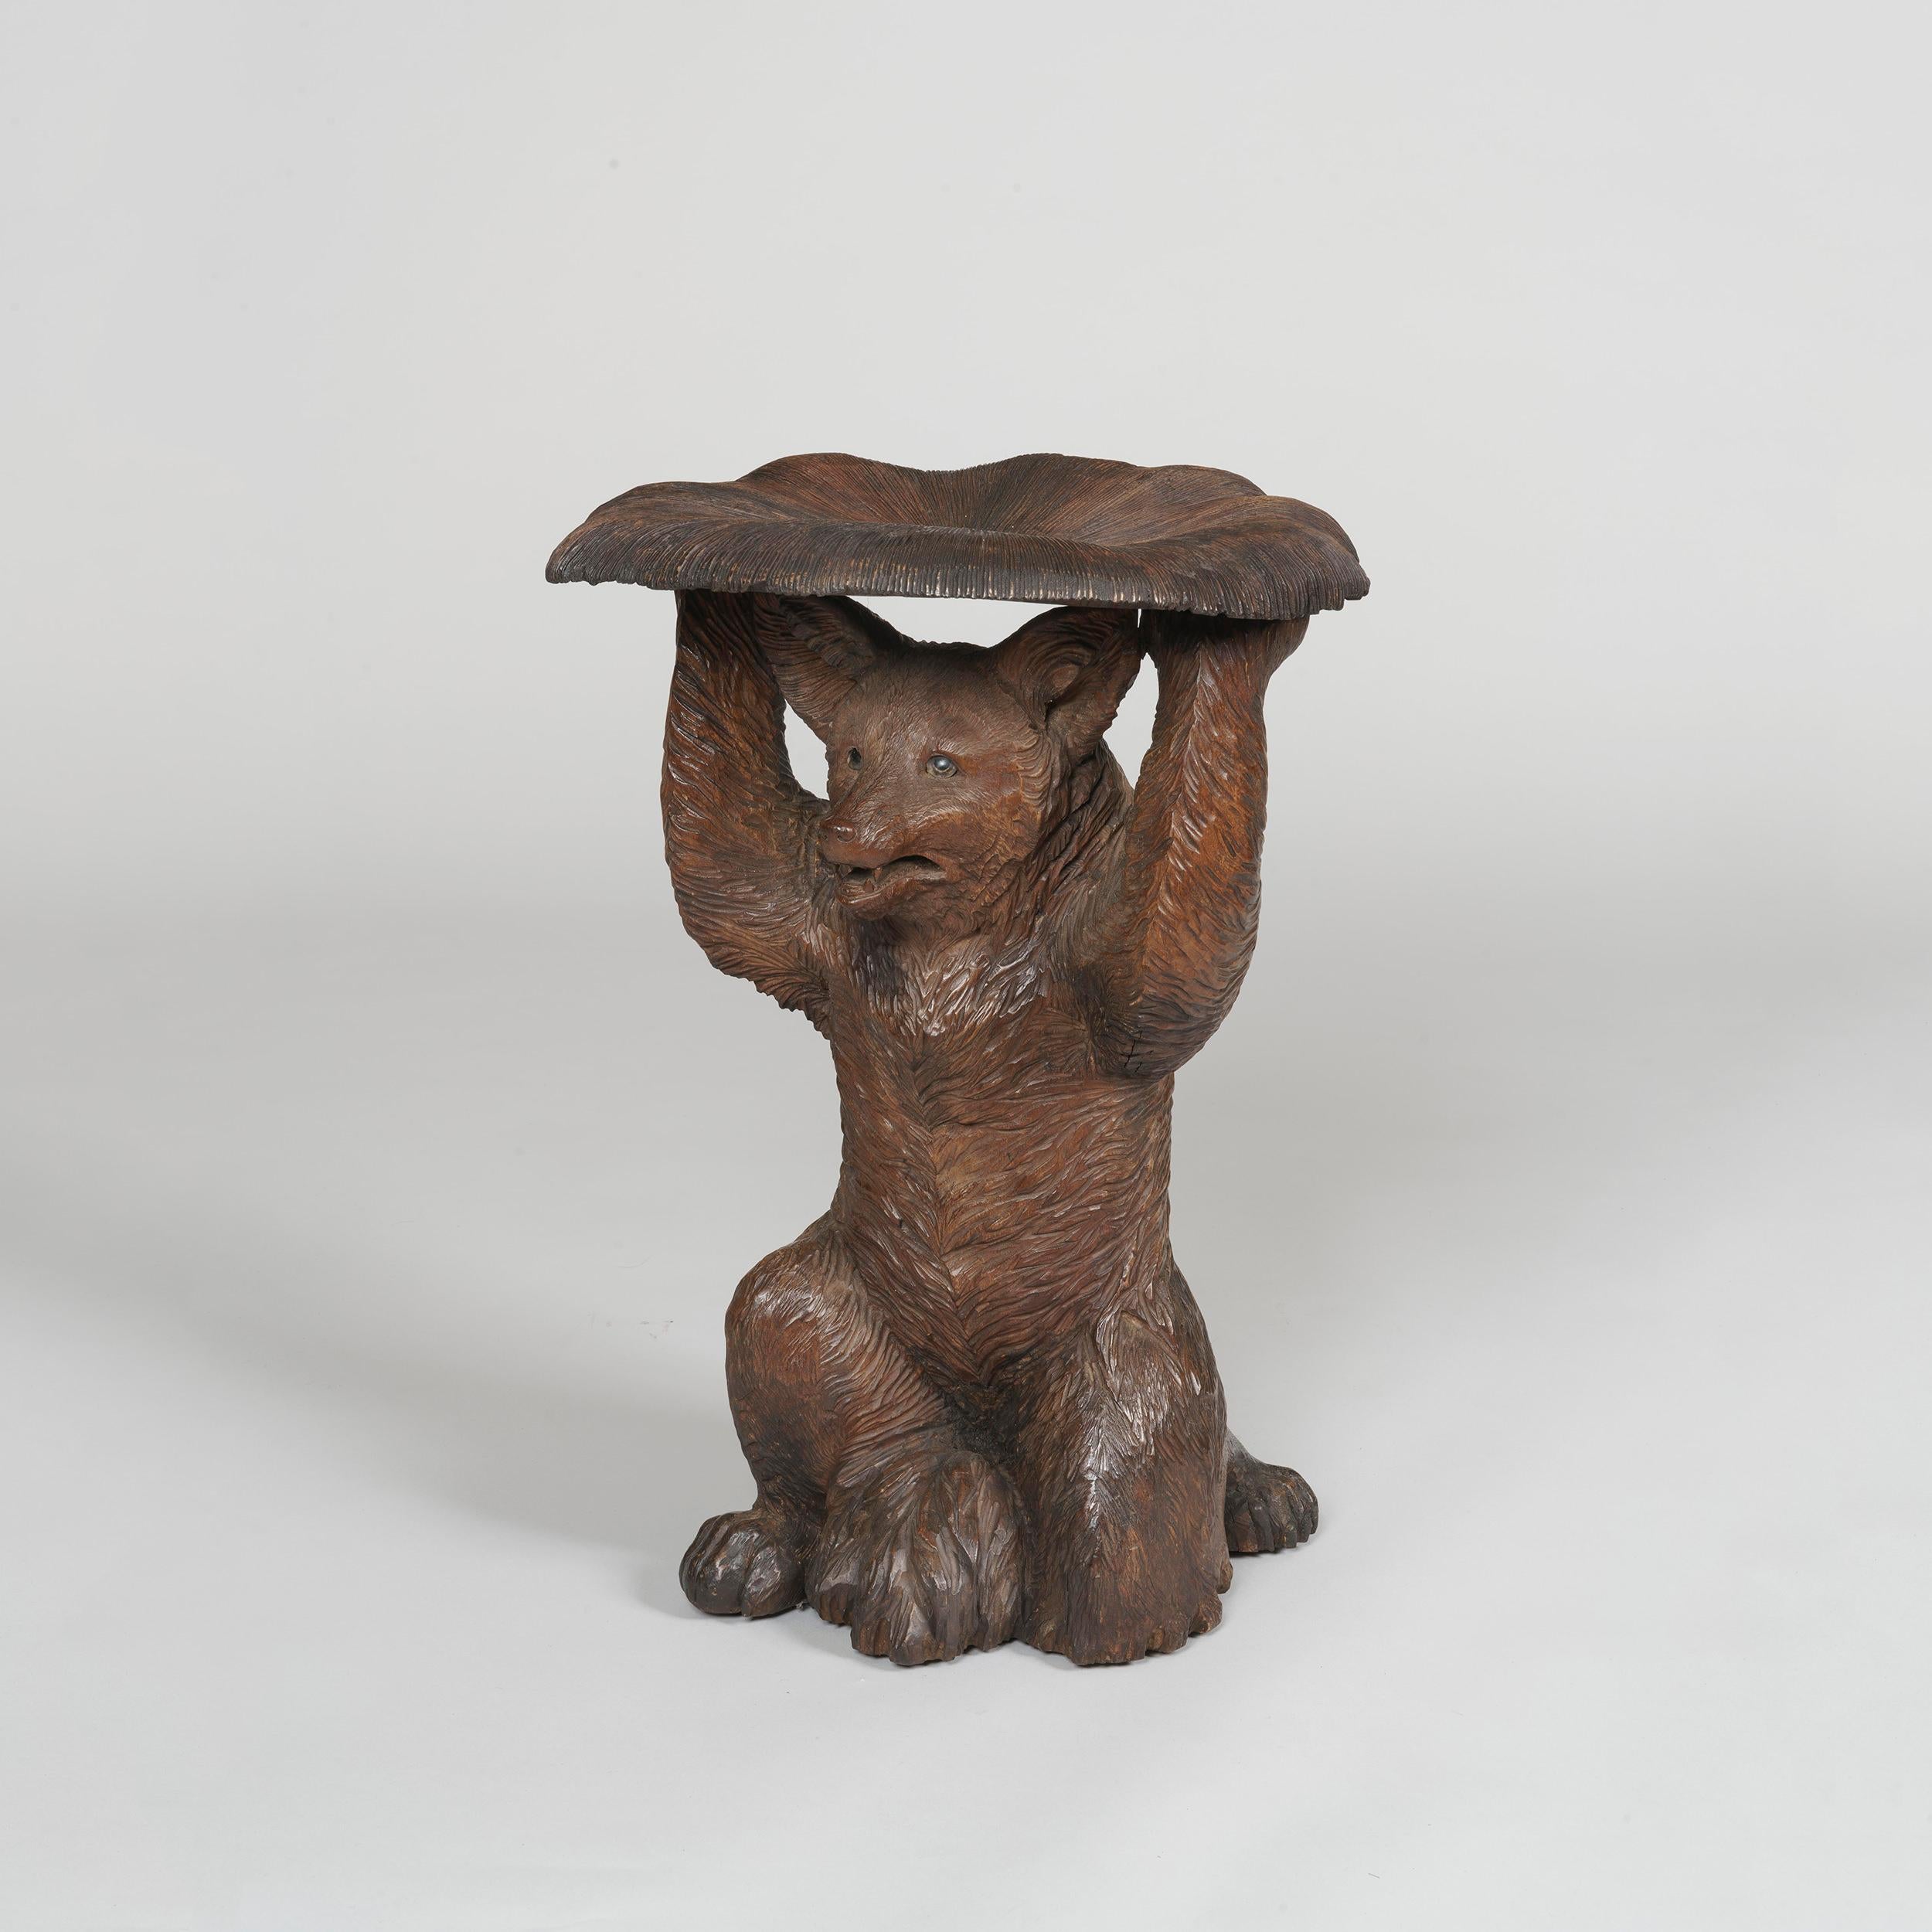 A 'Black Forest' fox stool

Constructed in a very well patinated and carved lindenwood, the kneeling fox having glass eyes, with monochrome naturalistic highlights; the seat carved to resemble a mushroom.
Brienz Area, circa 1900

Brienz, in the